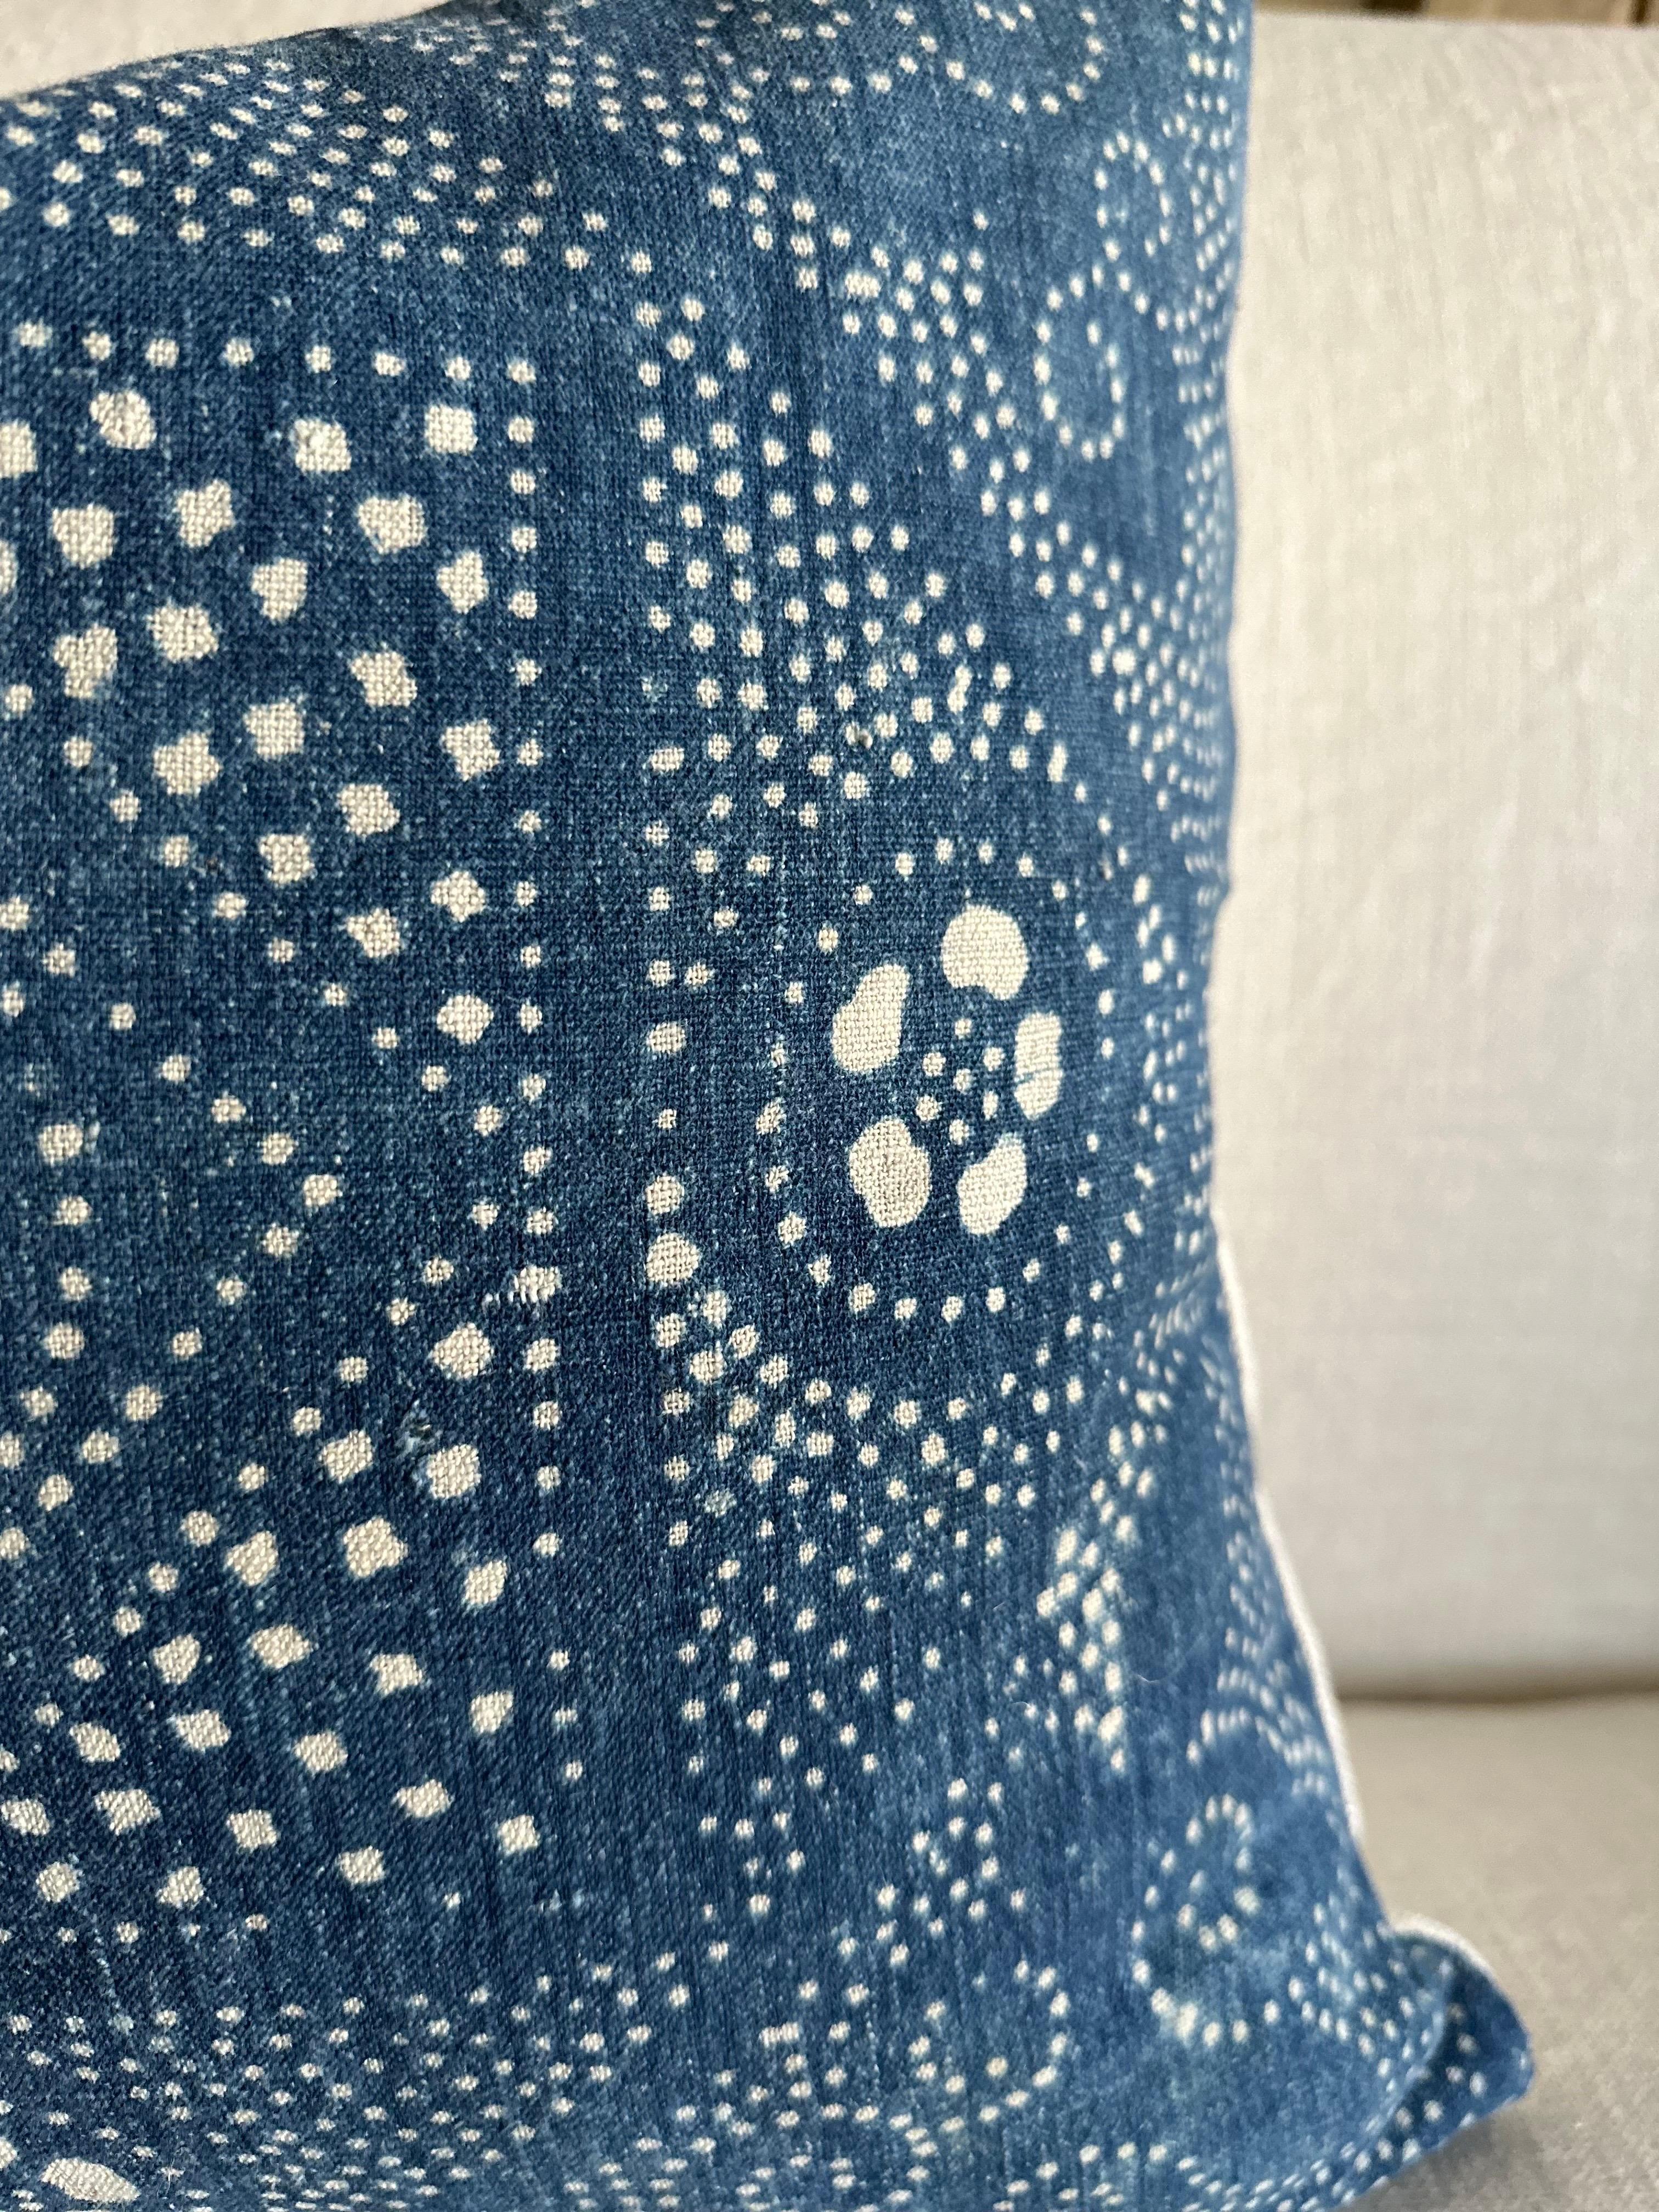 japanese blue and white fabric